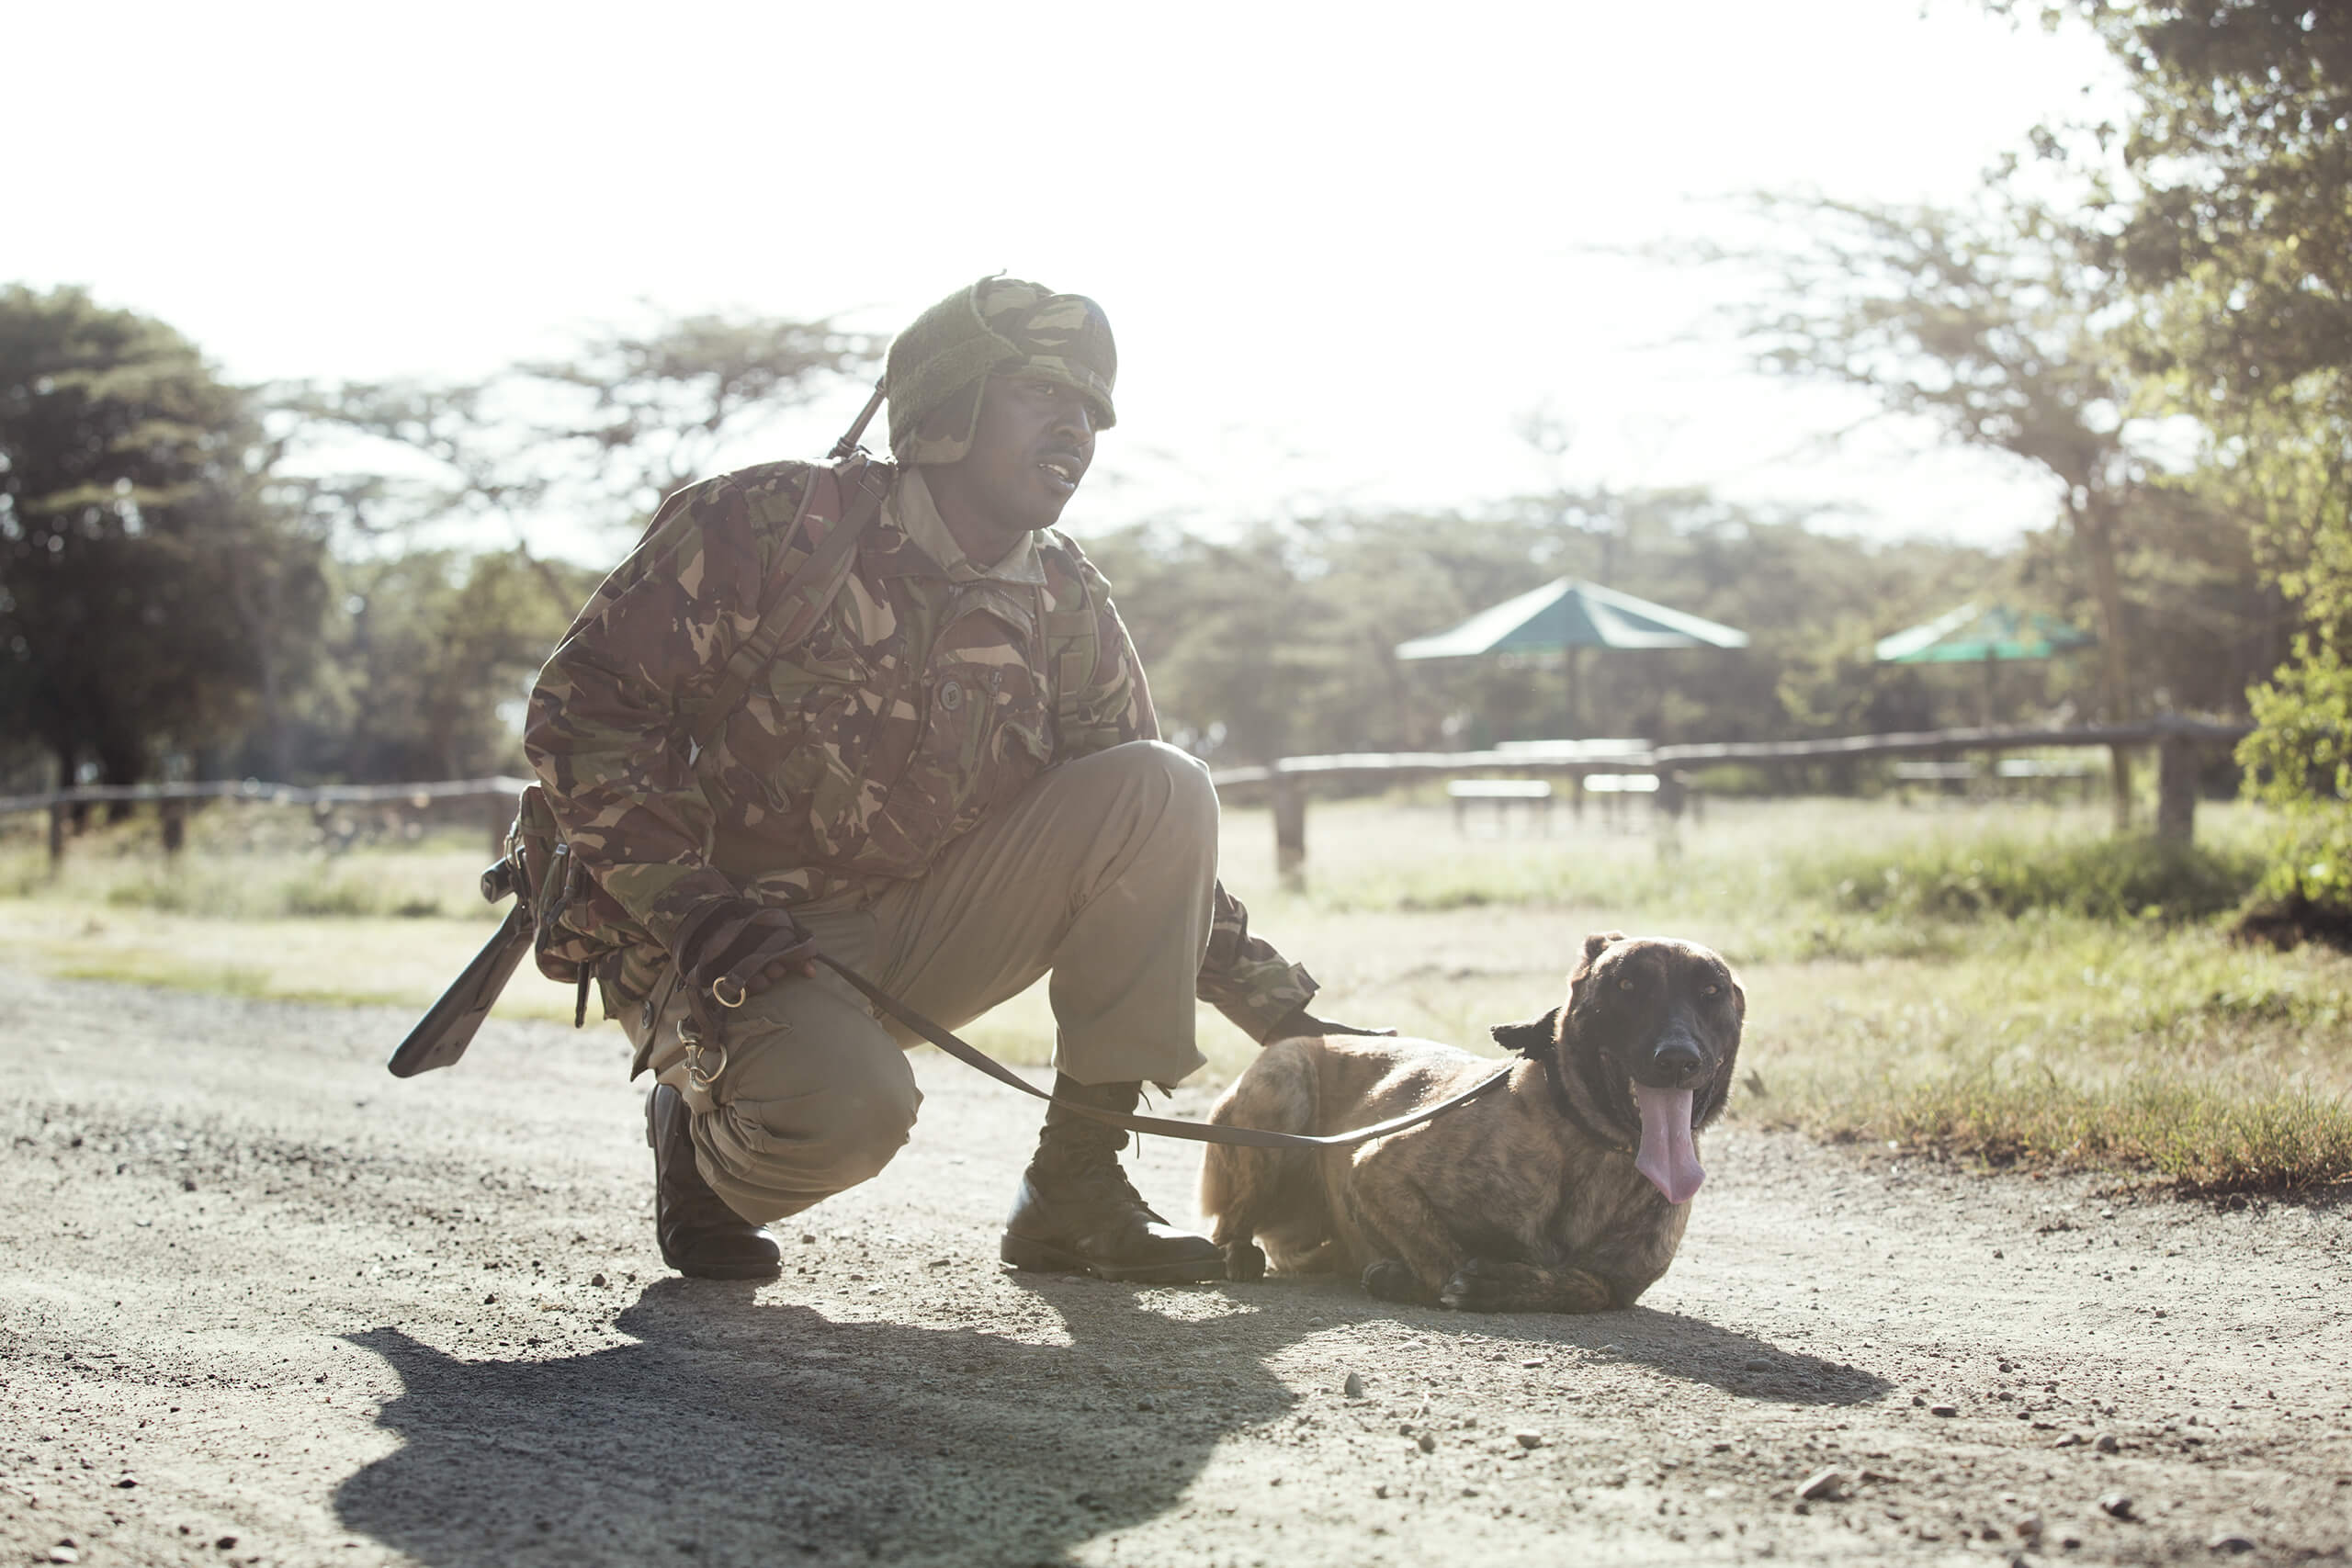 The KPR team at Ol Pejeta has a canine unit with highly trained handlers that work with assault, search and sniffer dogs.